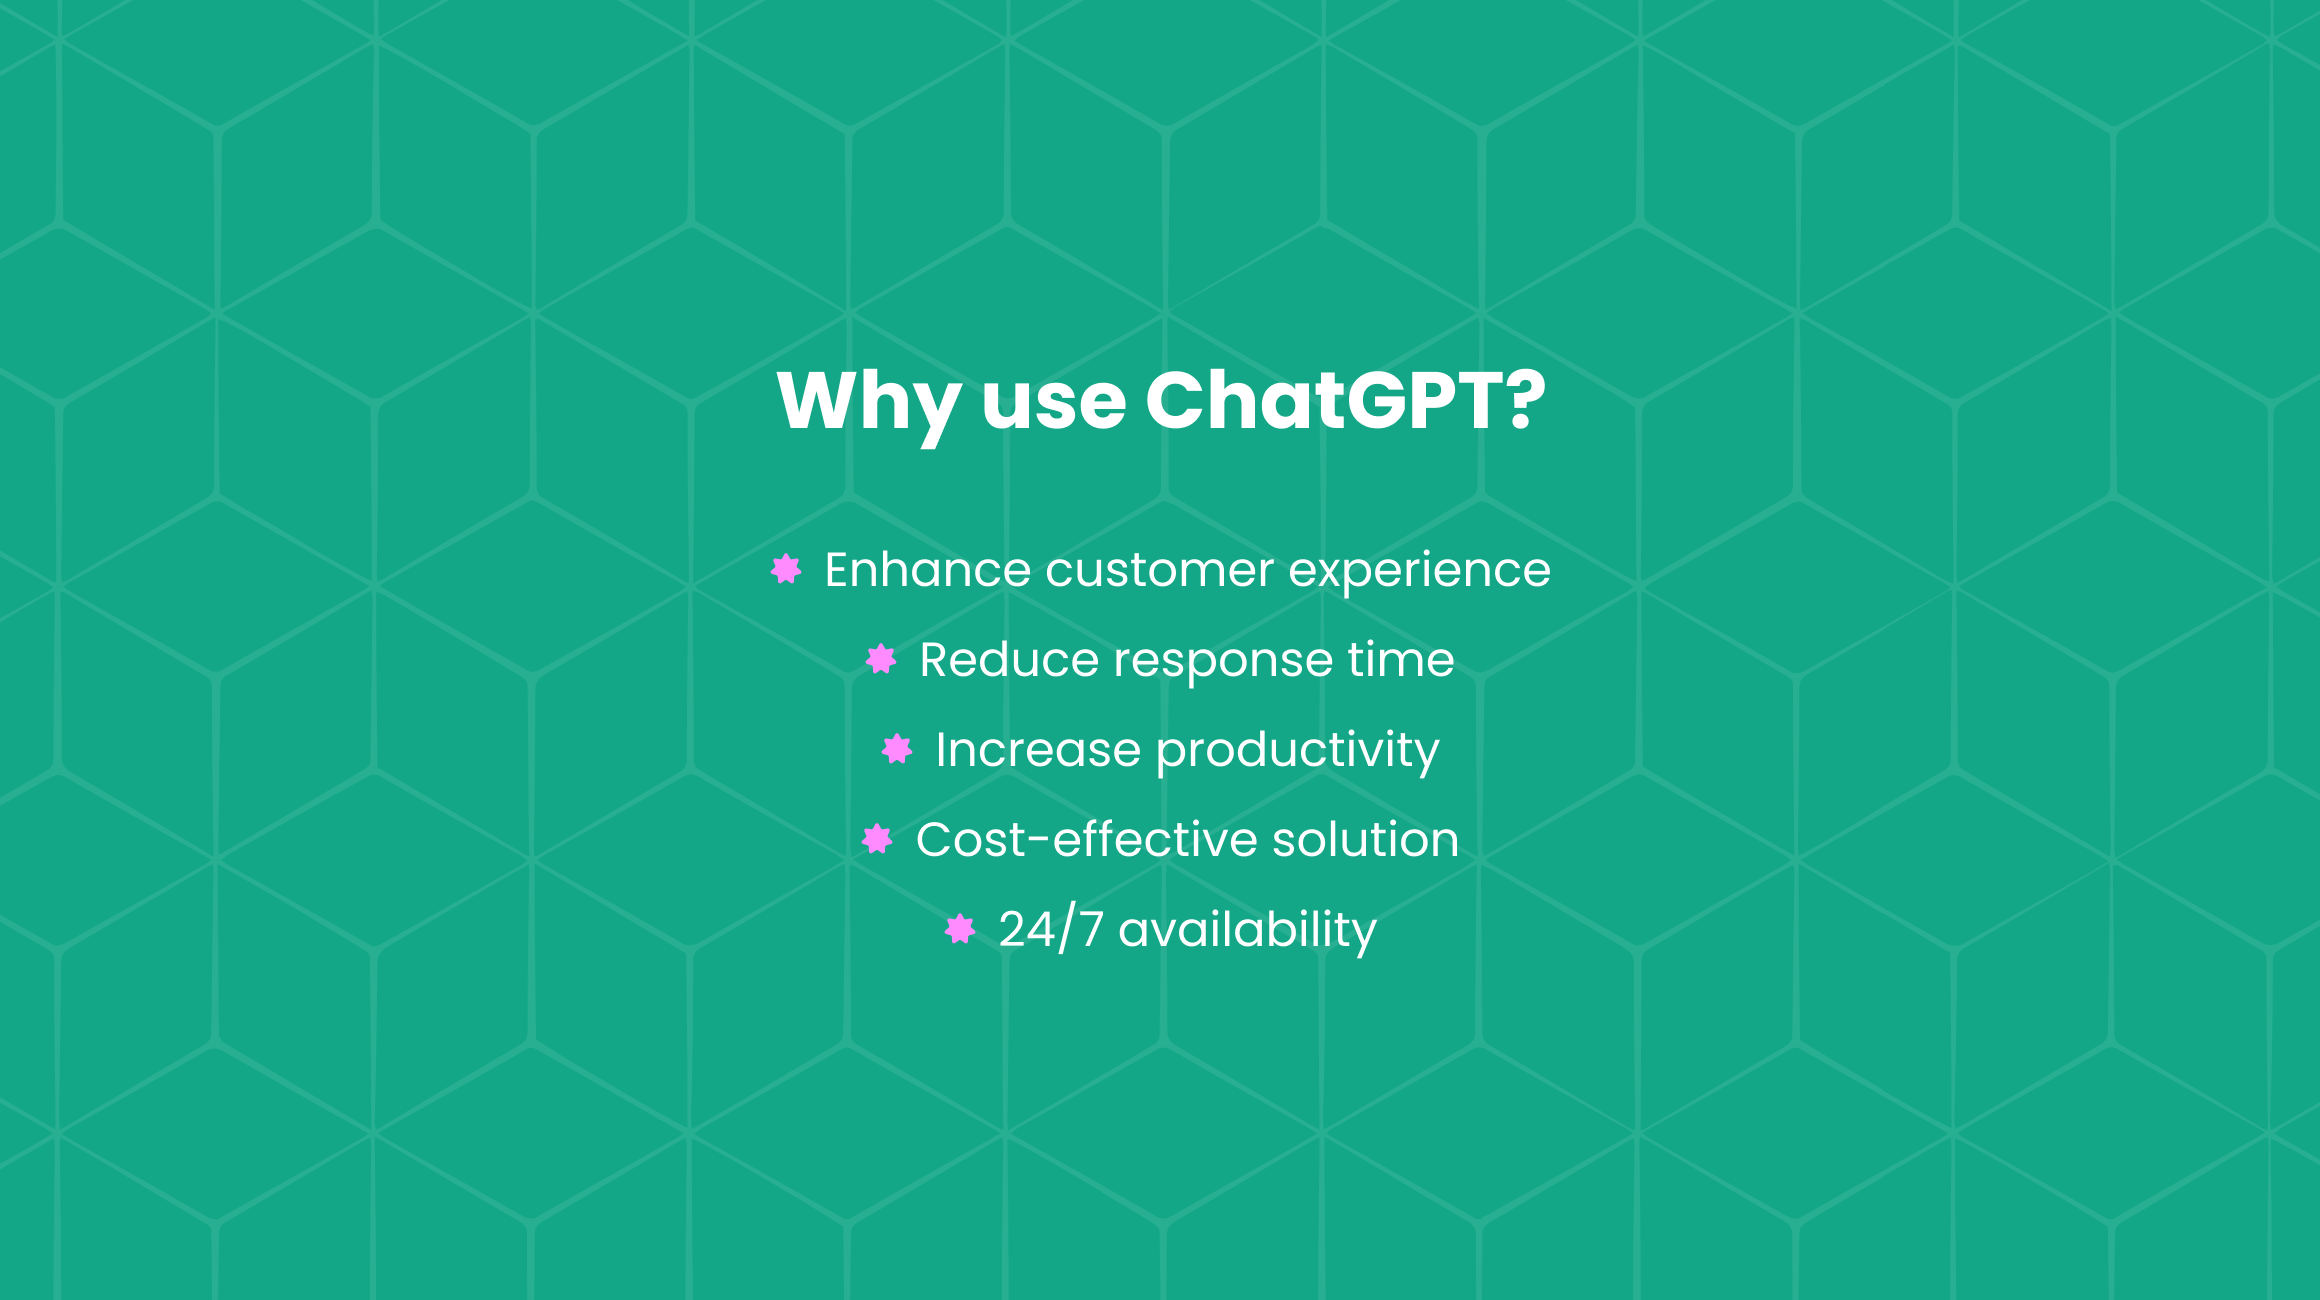 Why use ChatGPT for business?